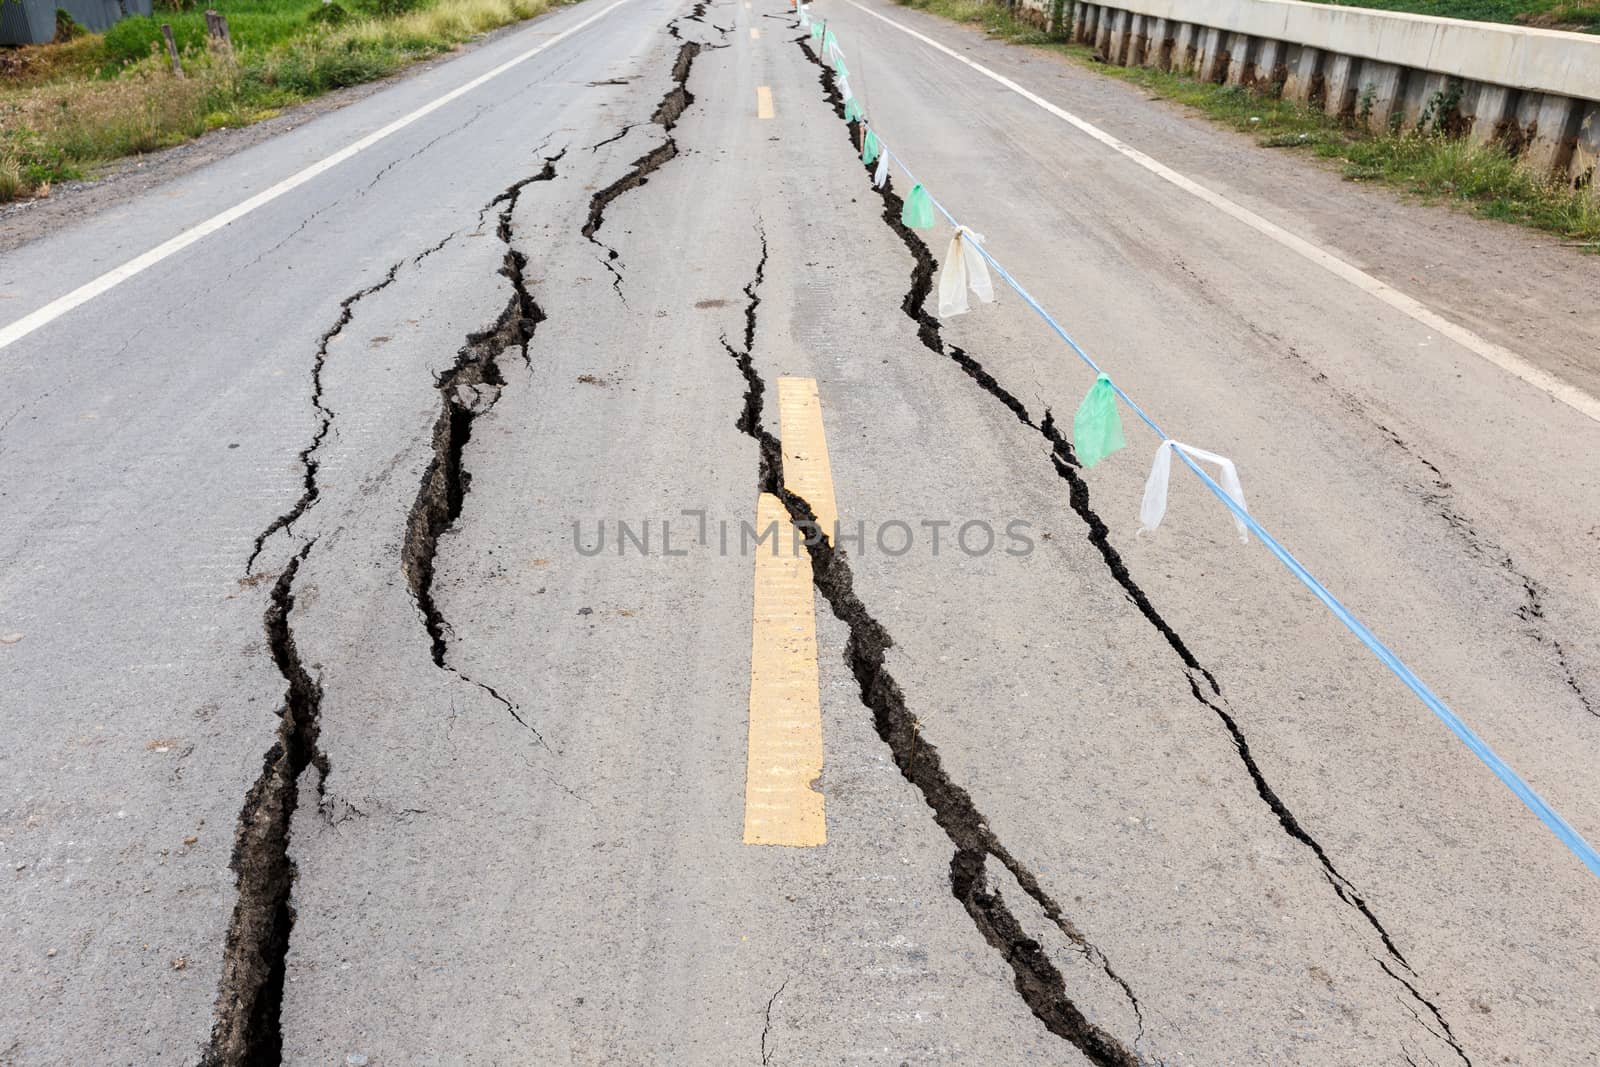 Asphalt road cracked and broken from earthquake.